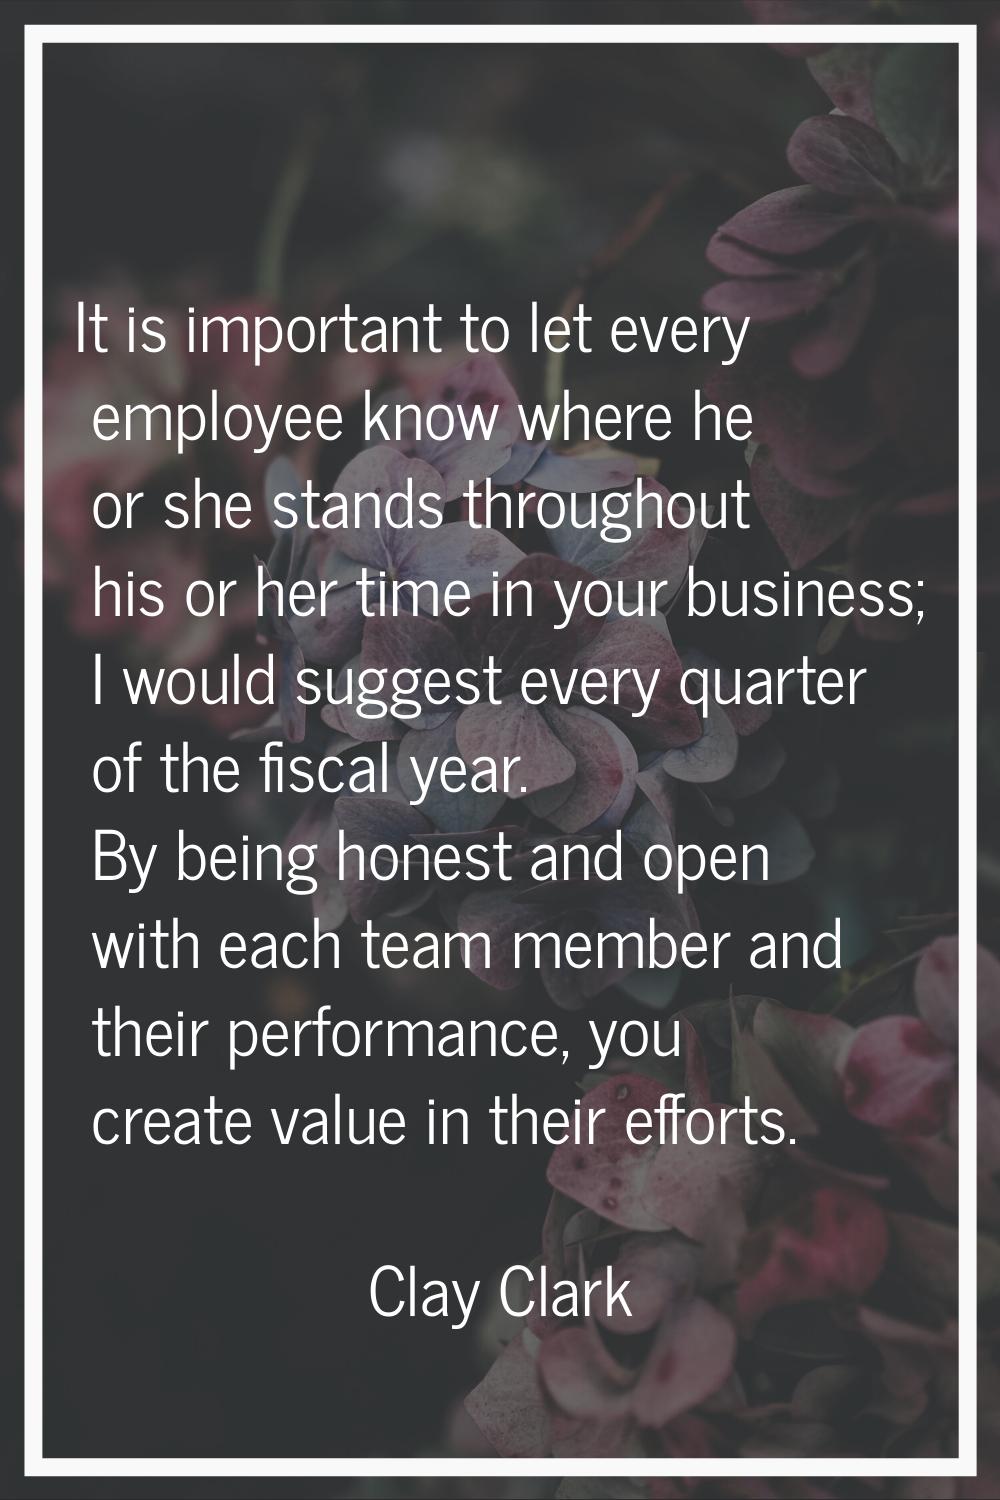 It is important to let every employee know where he or she stands throughout his or her time in you